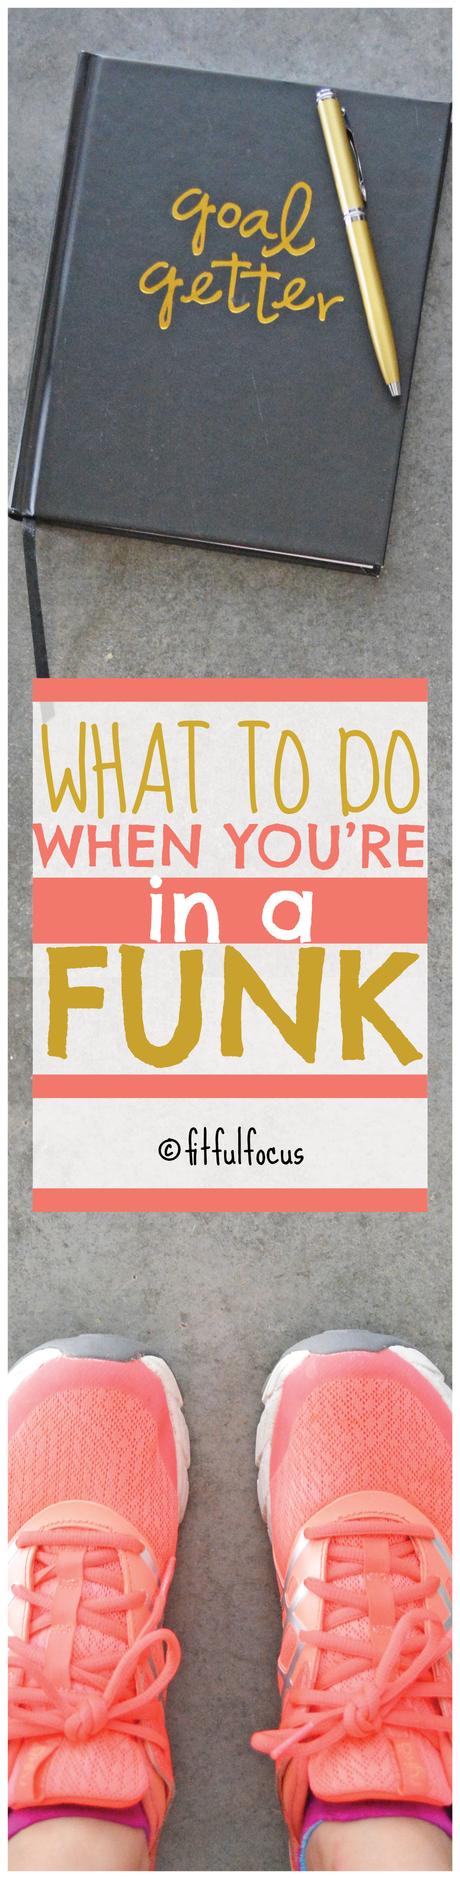 What To Do When You’re In A Funk